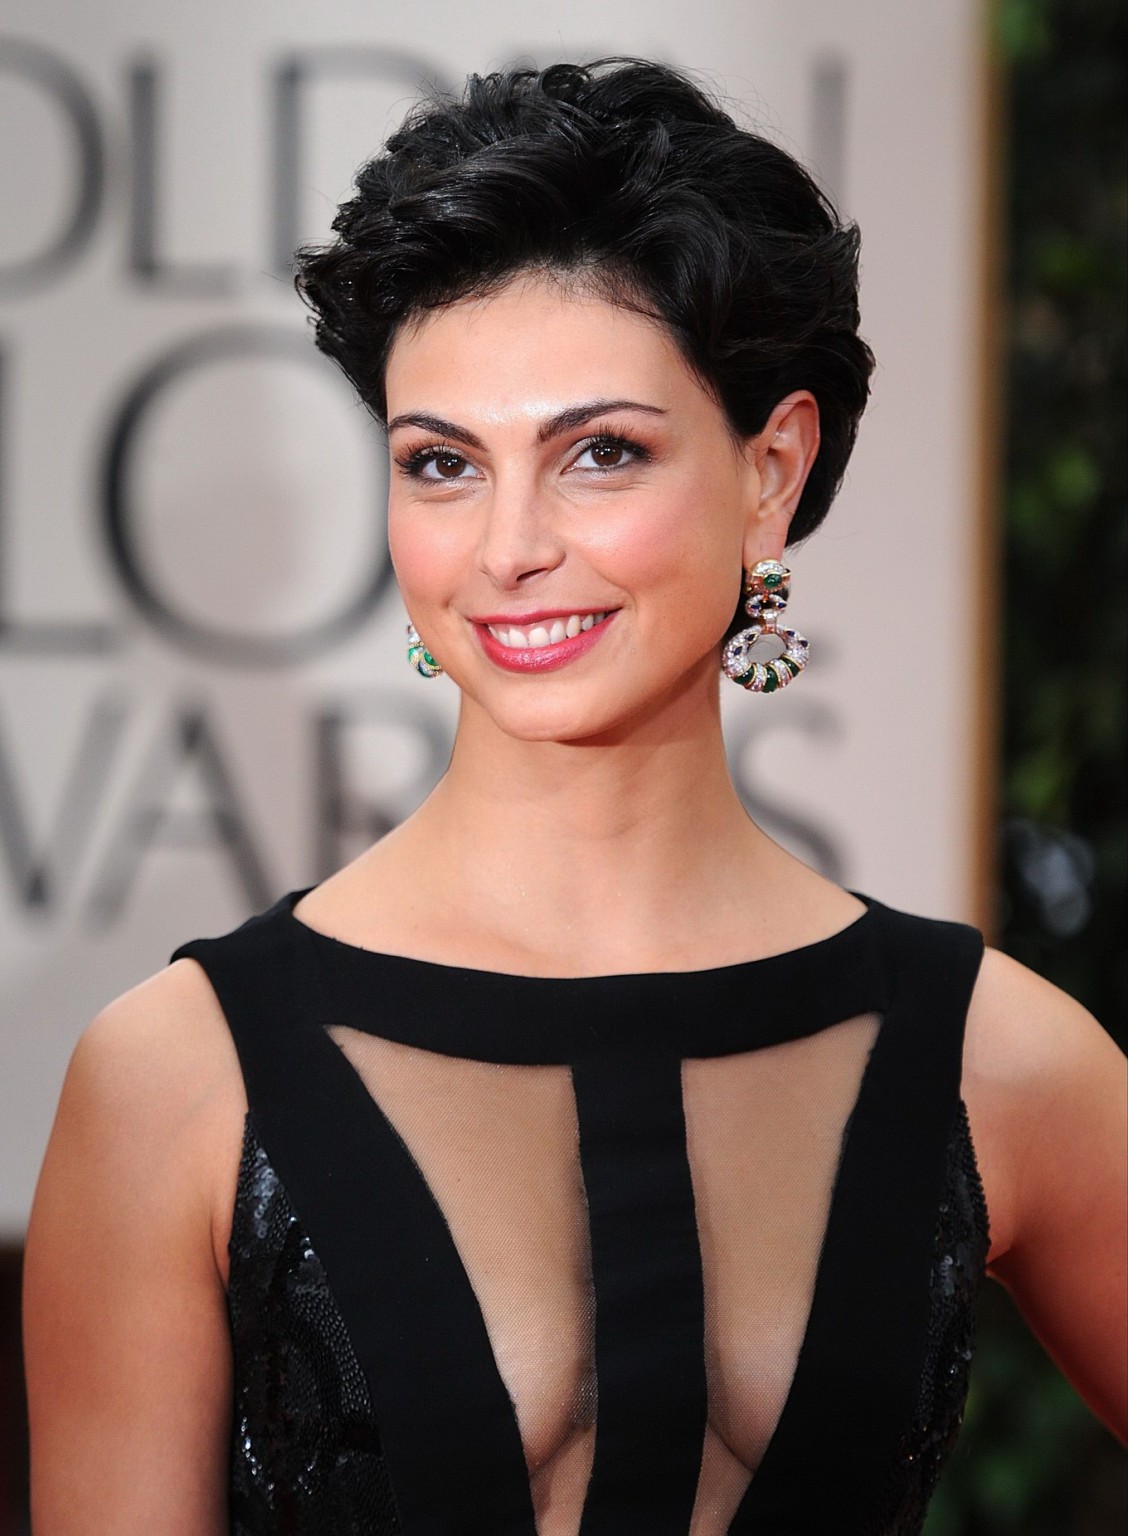 Morena Baccarin Braless Wearing Sexy Black Dress At The Golden Globes 2012 Porn Pictures Xxx